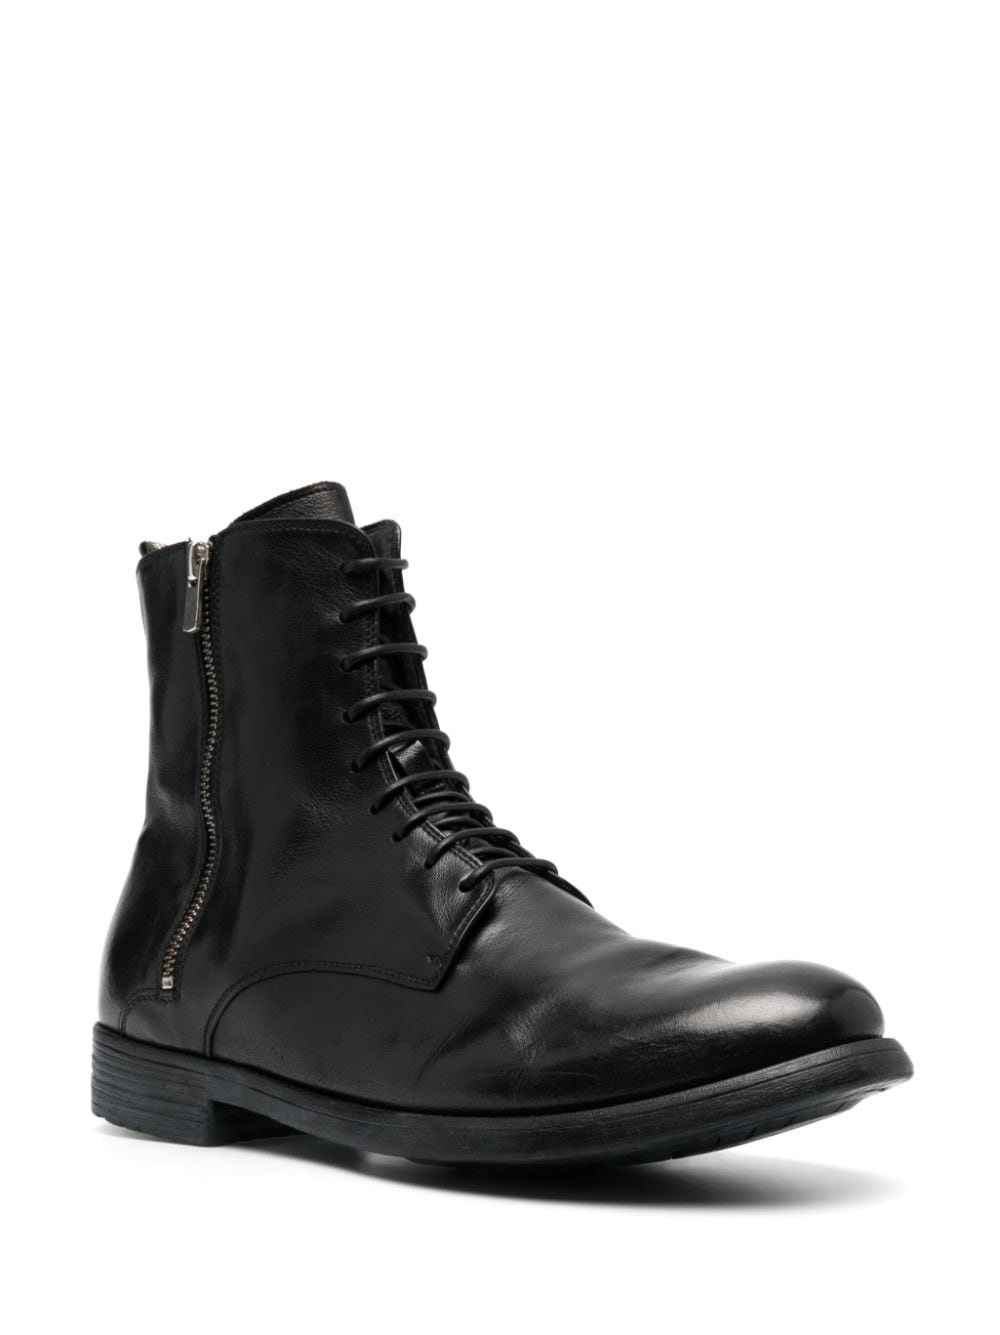 Officine Creative Hive 053 Leather Ankle Boots - Farfetch